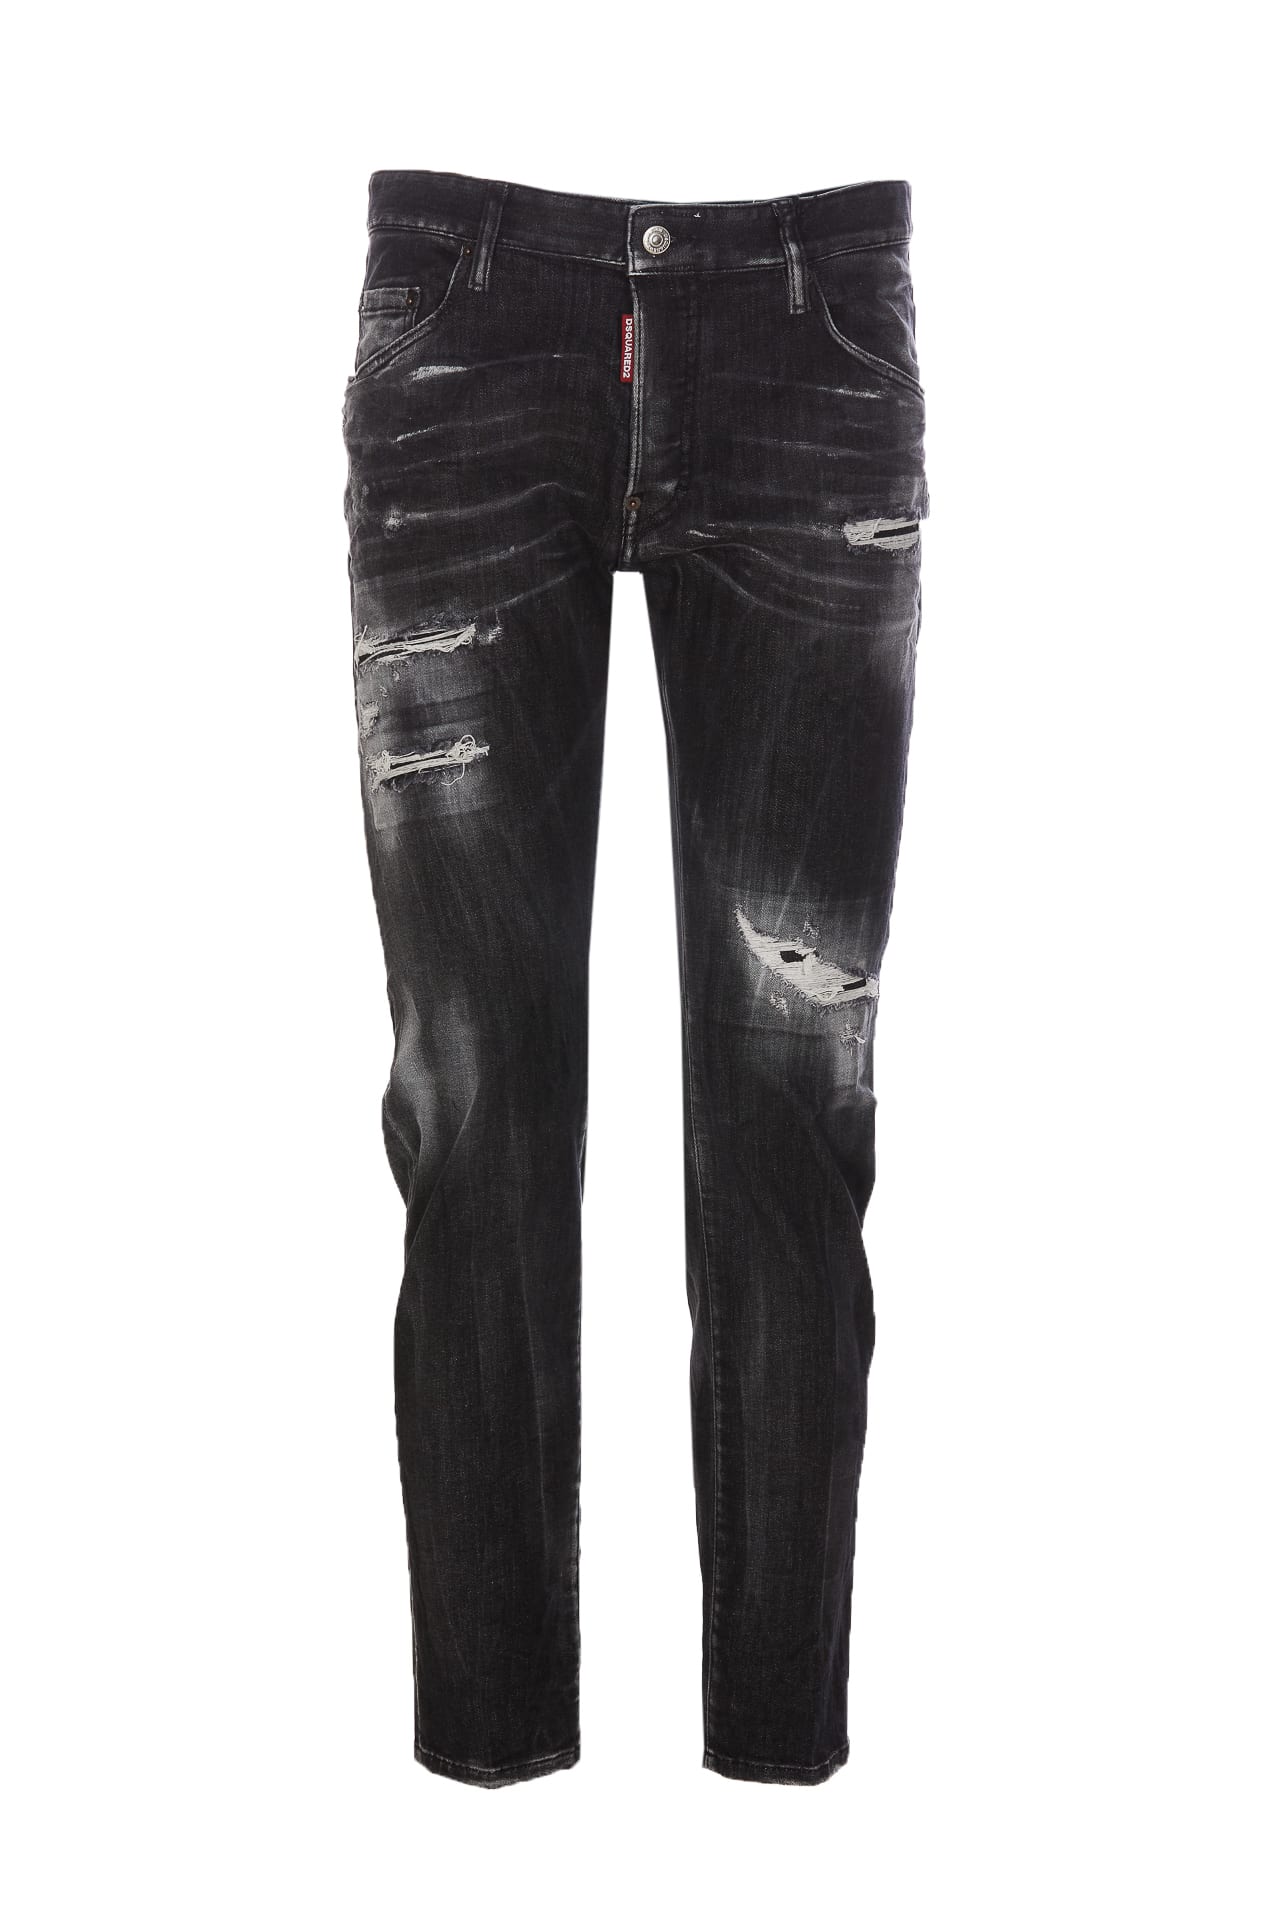 Dsquared2 Ripped Skater Jean Jeans